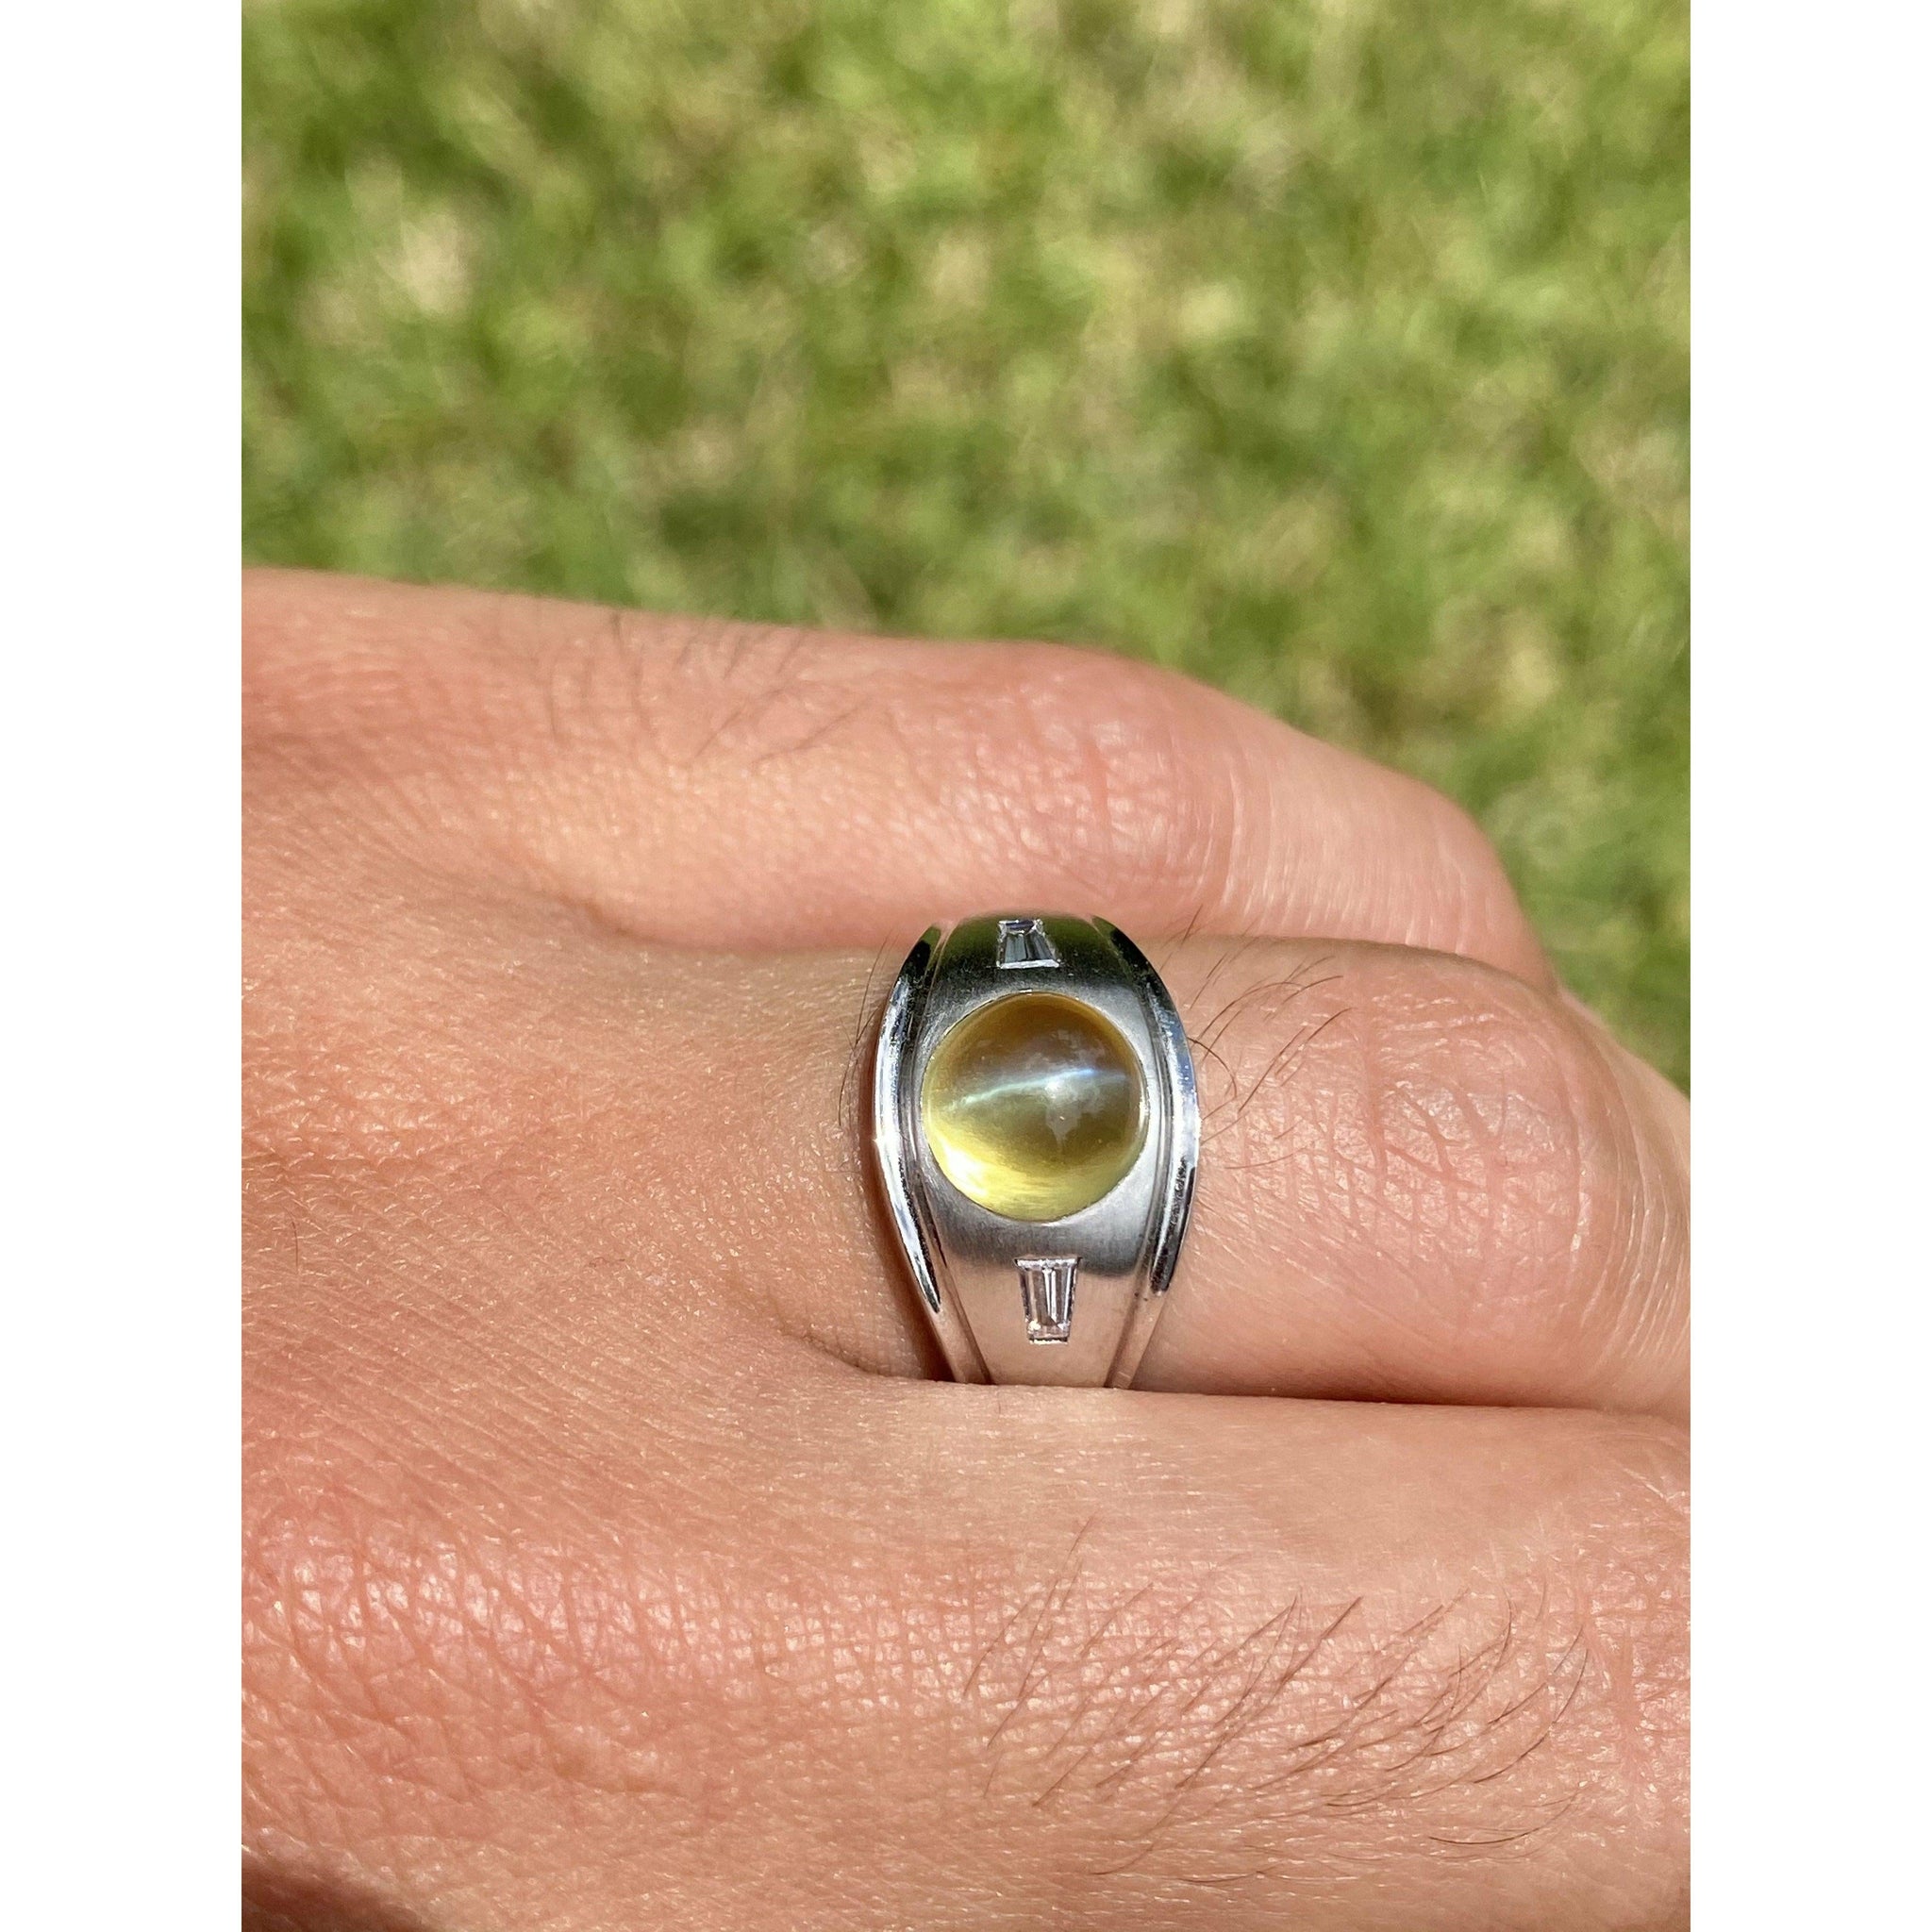 Sold at Auction: Platinum ring with 31.5 carat cabochon Cats-eye Chrysoberyl